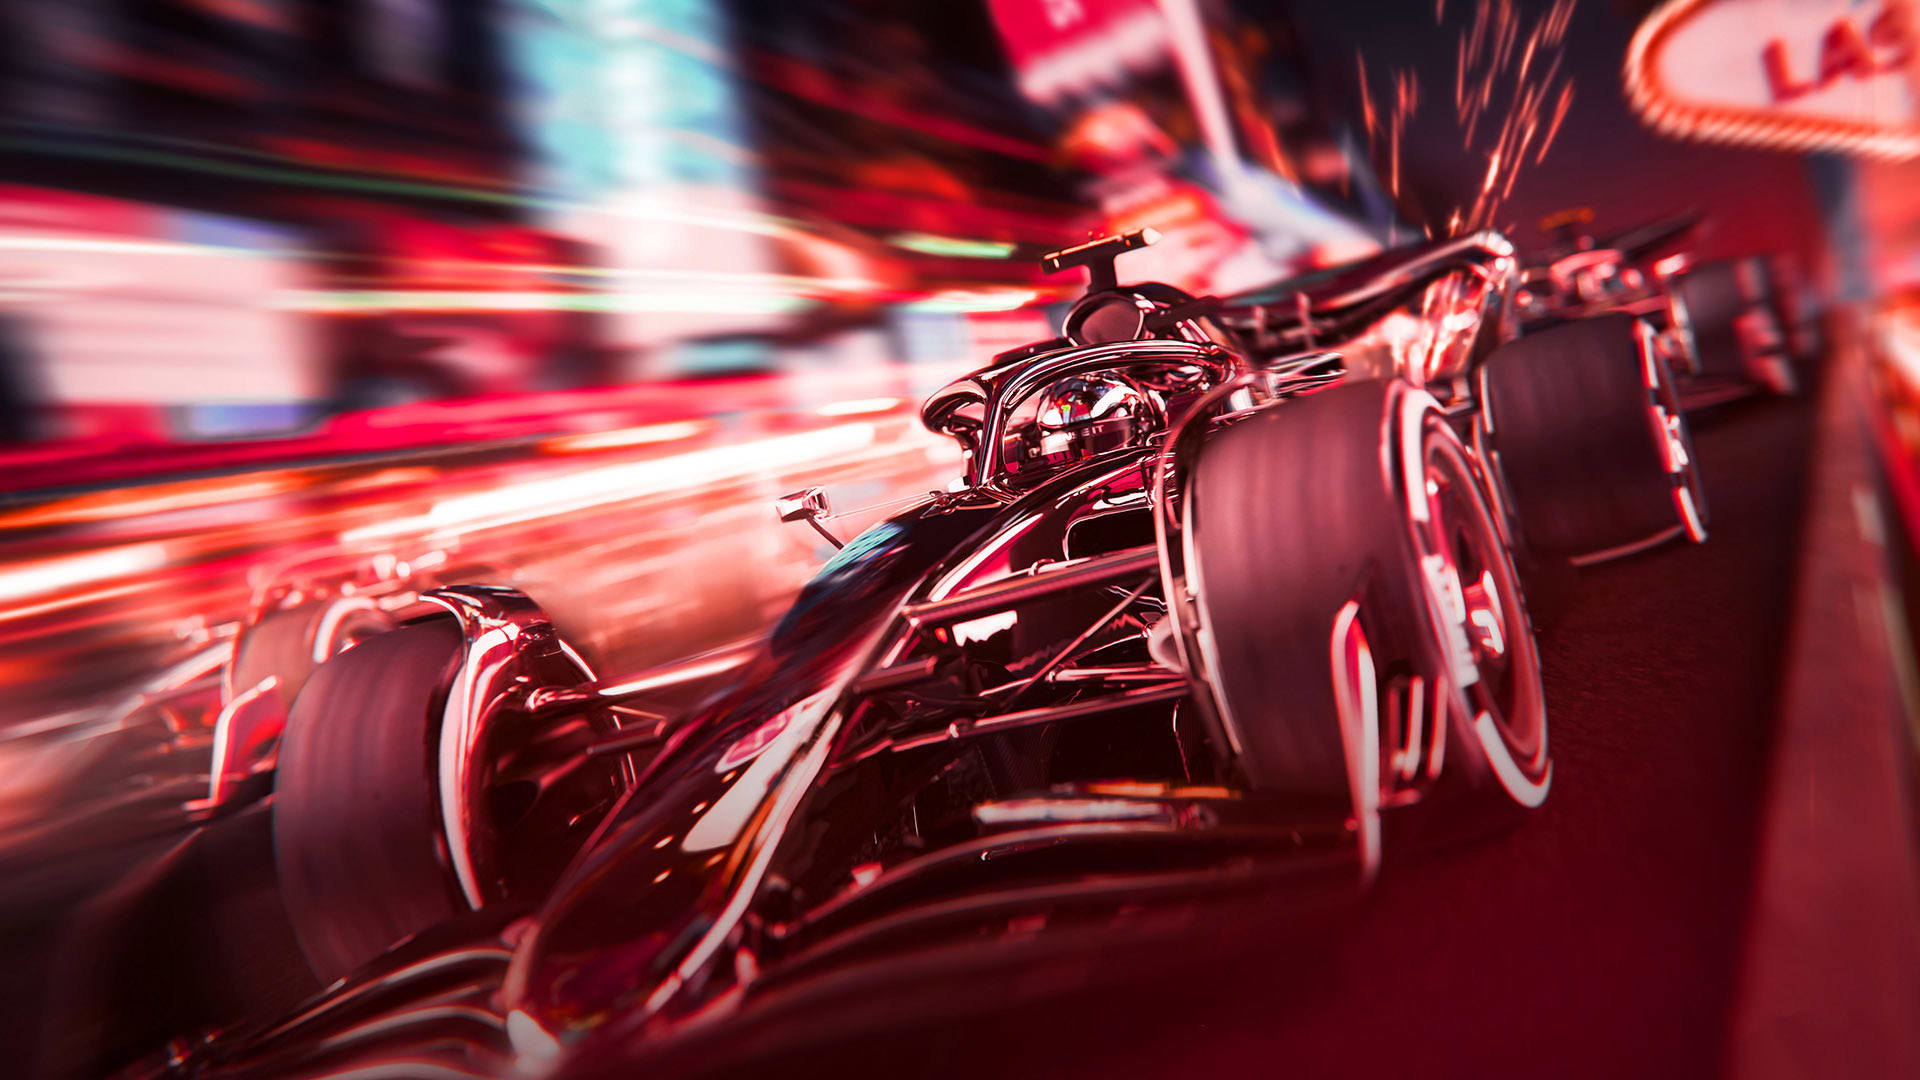 Preregister for Las Vegas Grand Prix tickets and help provide a